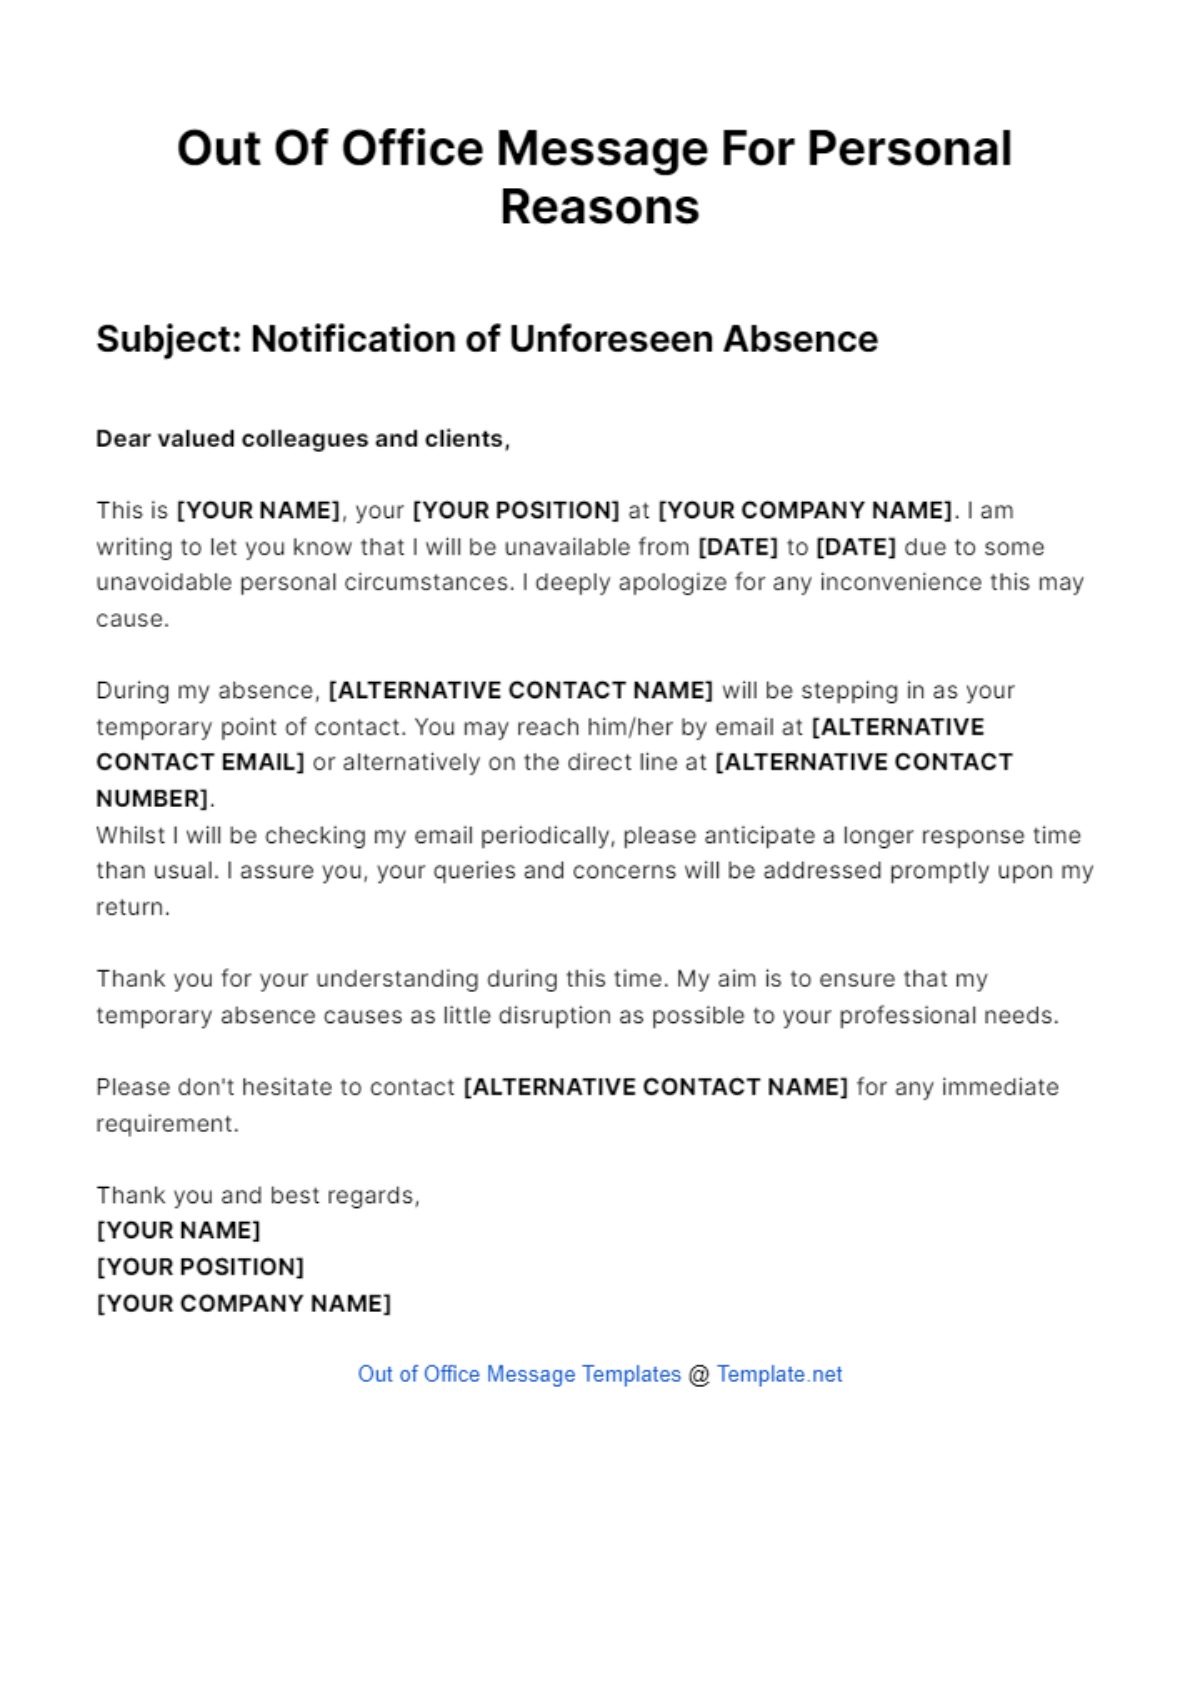 Out Of Office Message For Personal Reasons Template